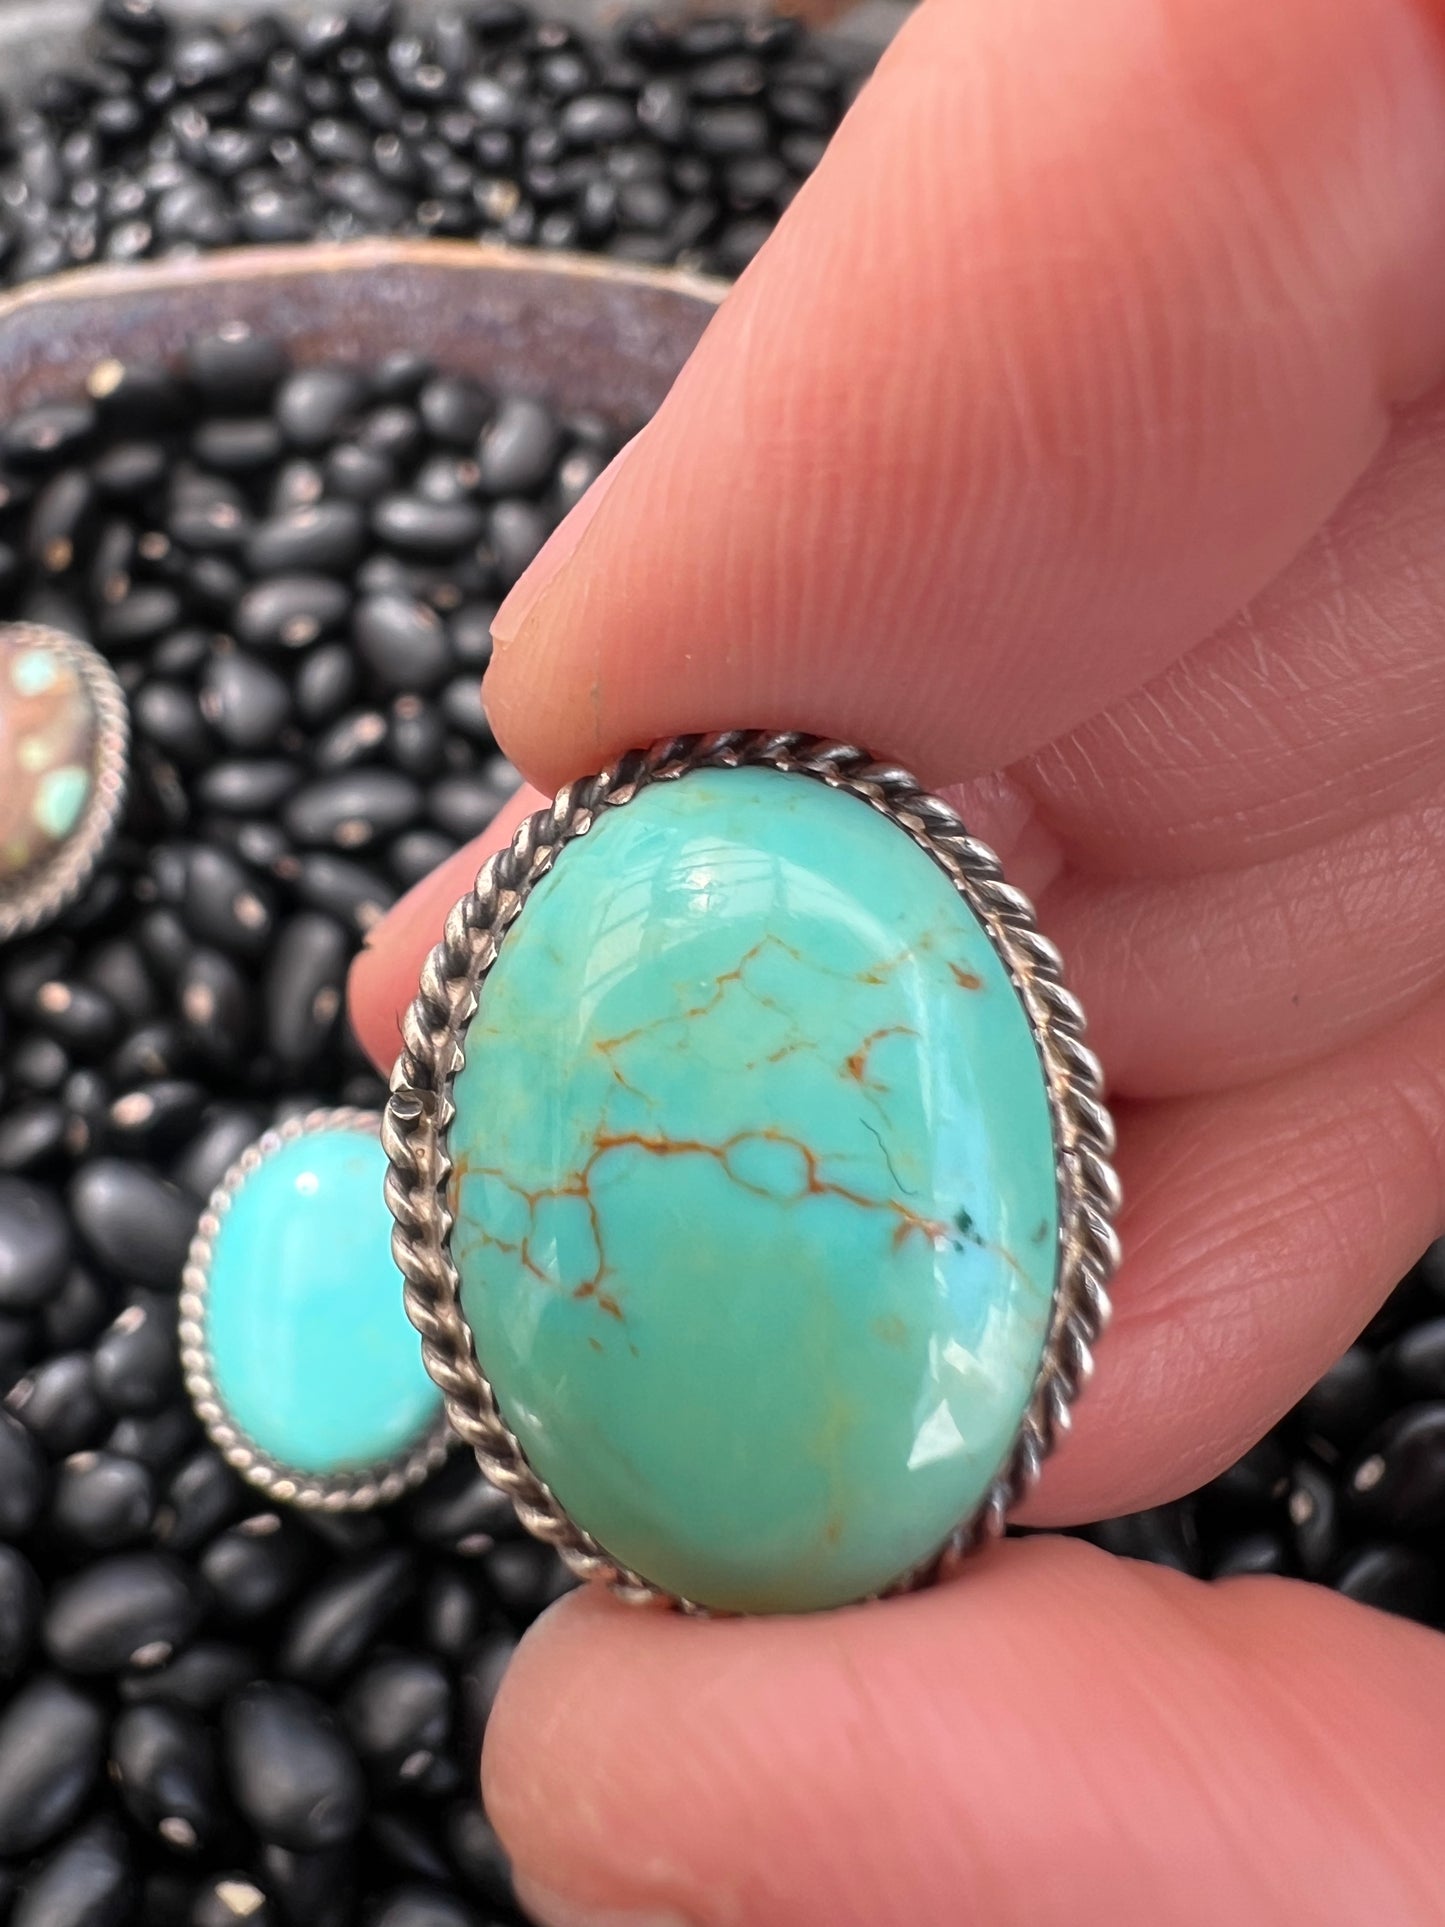 The GOAT turquoise Ring